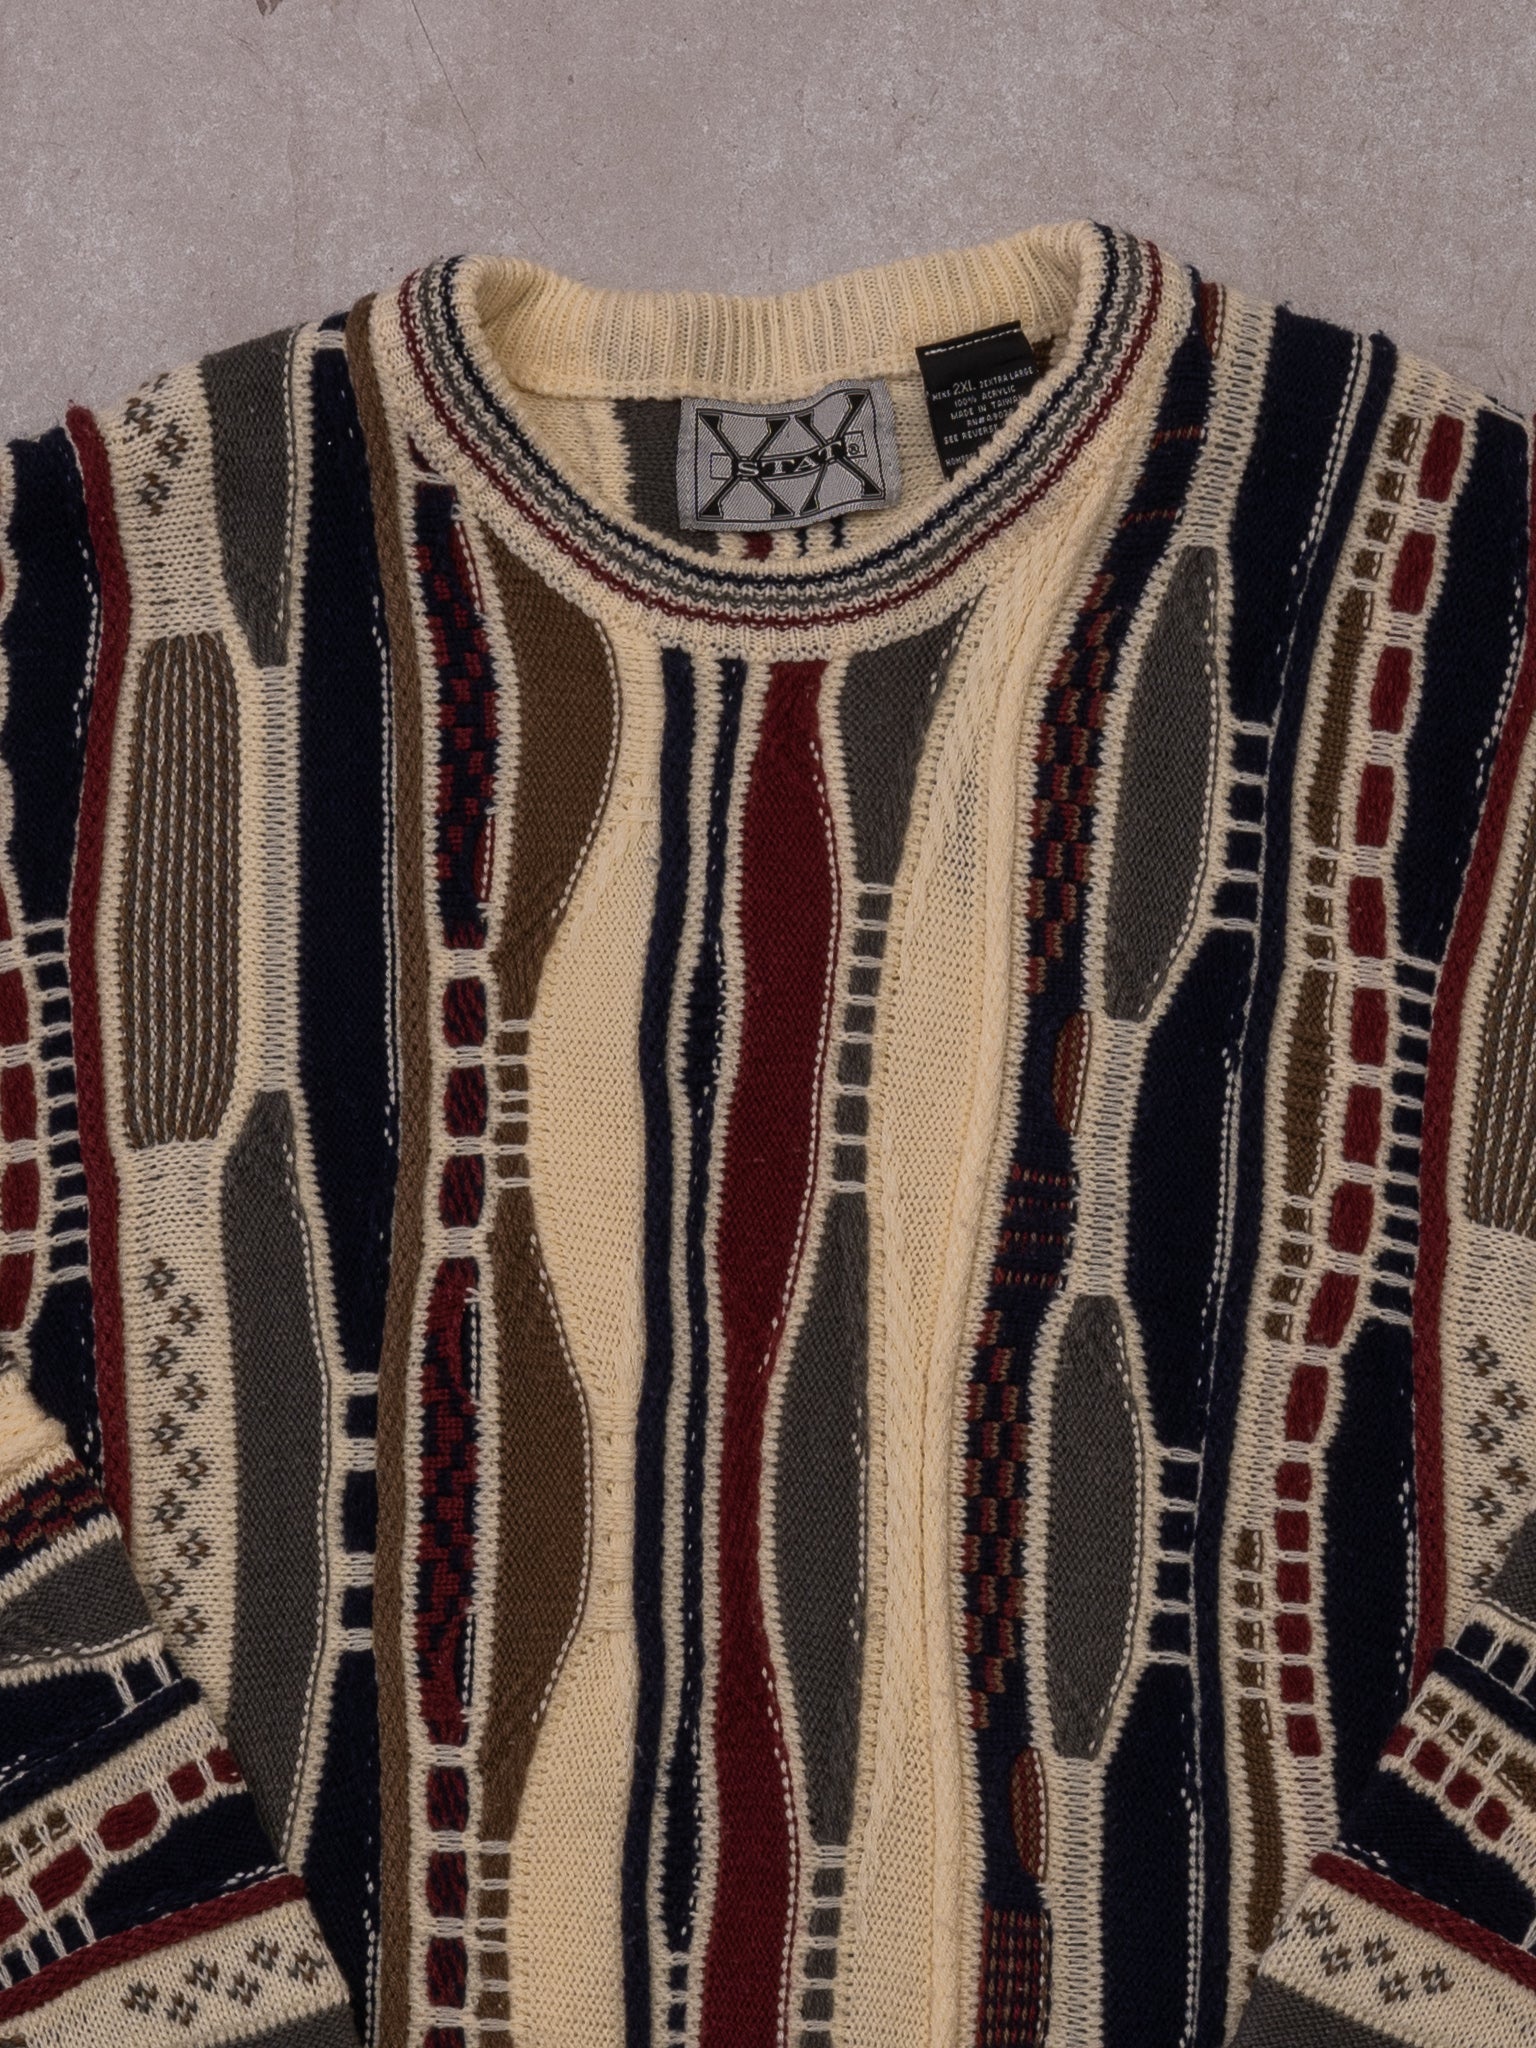 Vintage Stat Multicolored Coogi Knit Sweater (L)